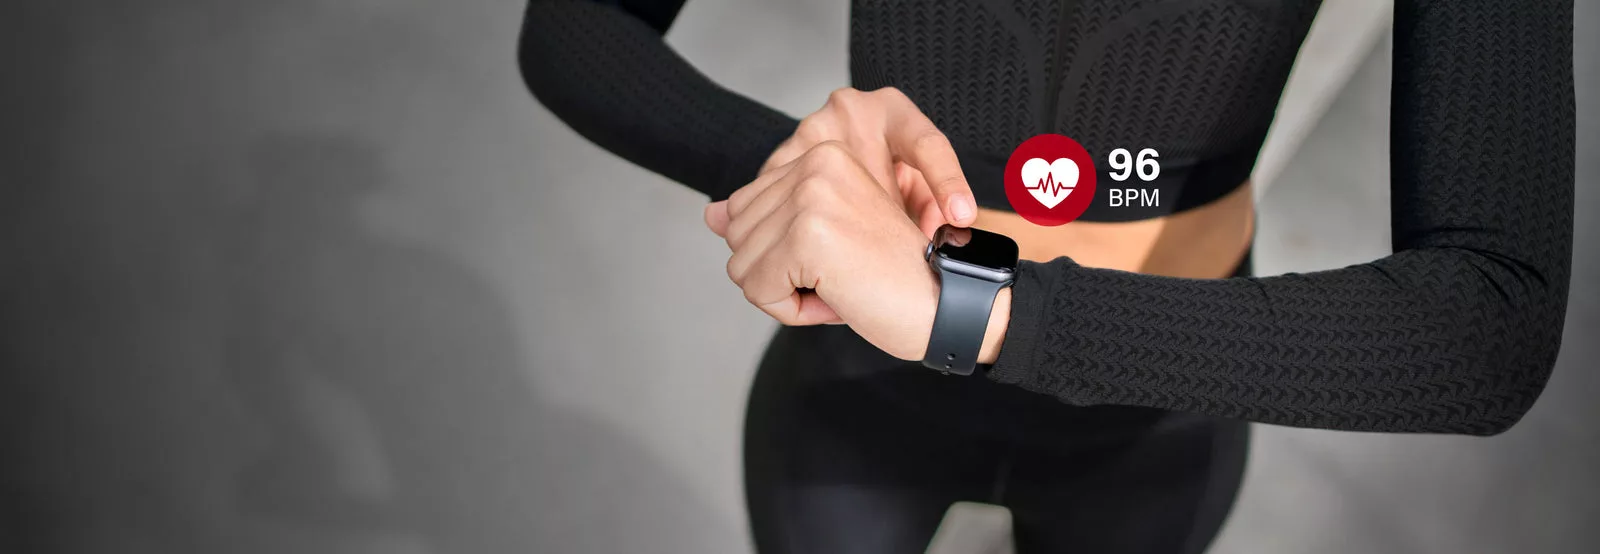 Heart Rate Training Zones Benefits and What to Wear Per Zone